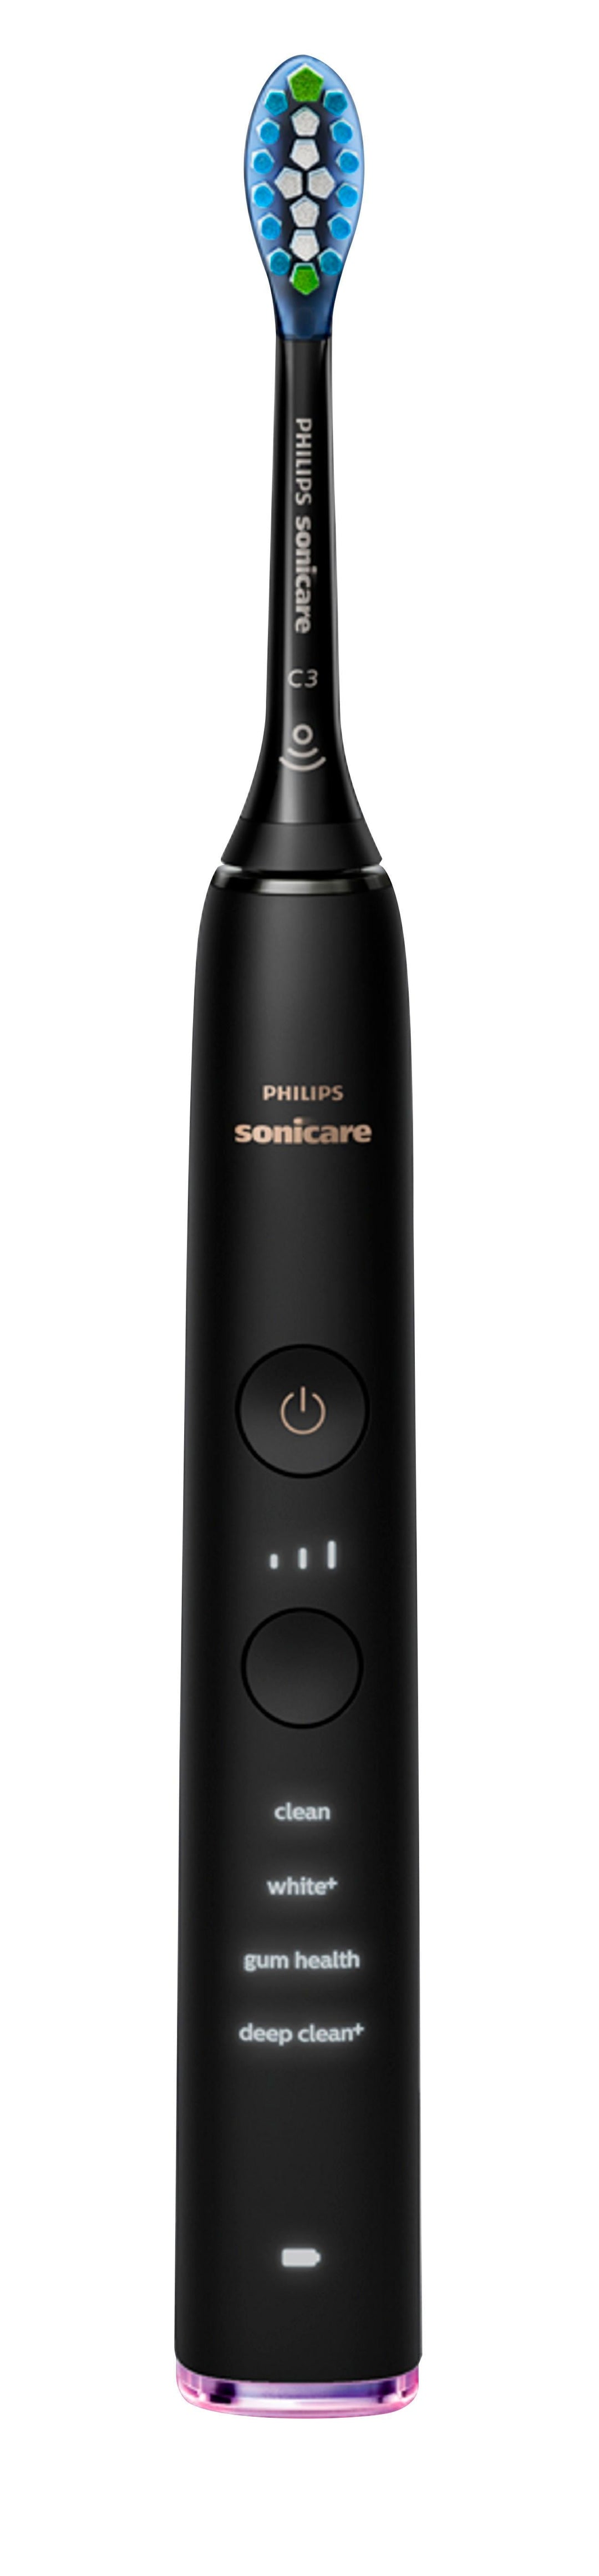 Philips Sonicare - DiamondClean Smart 9300 Rechargeable Toothbrush - Black_0